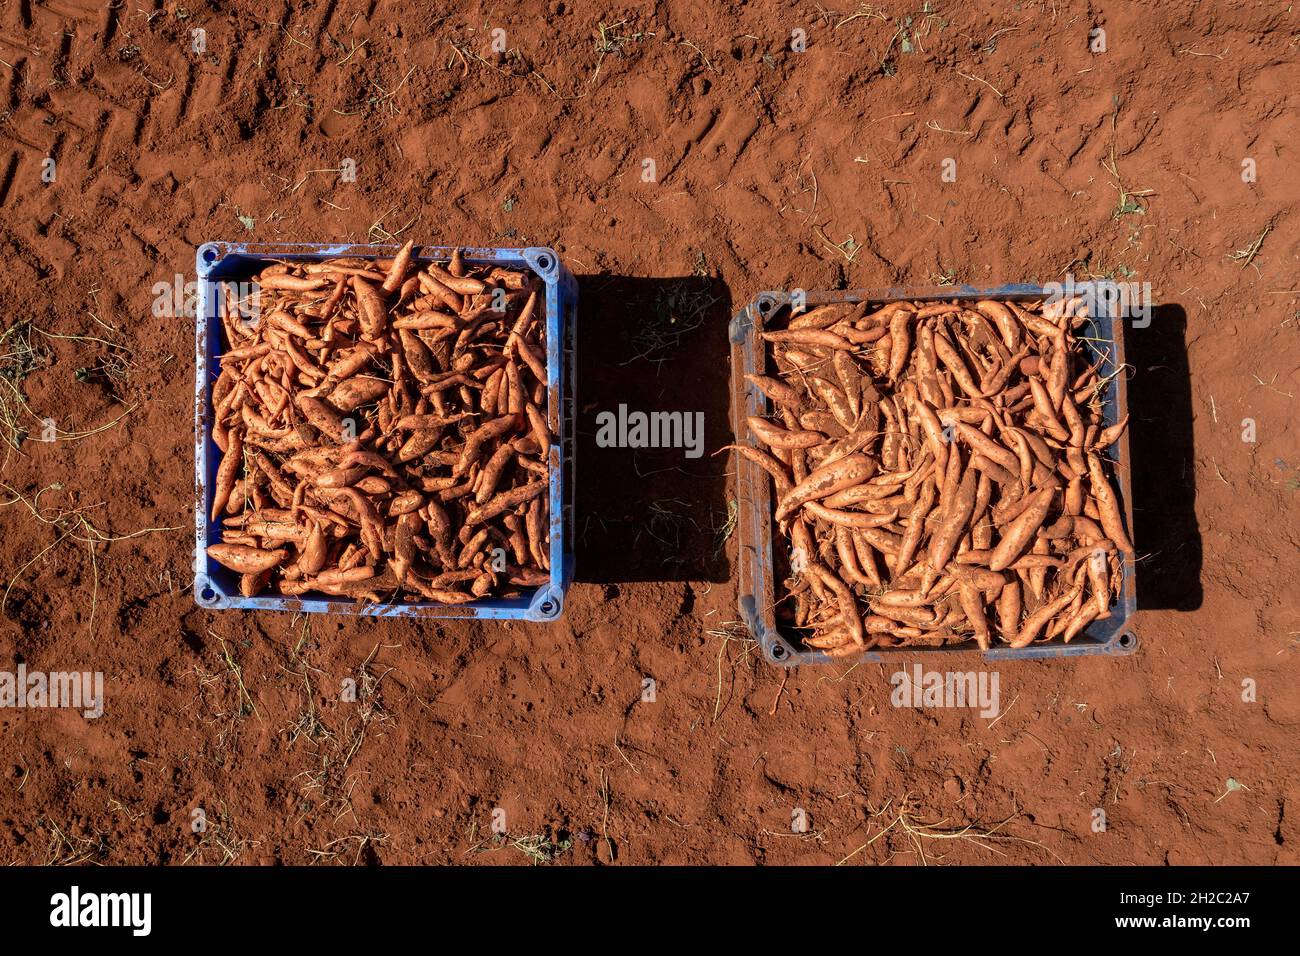 Pallet of Fresh dug Sweet Potatoes in a field. Stock Photo